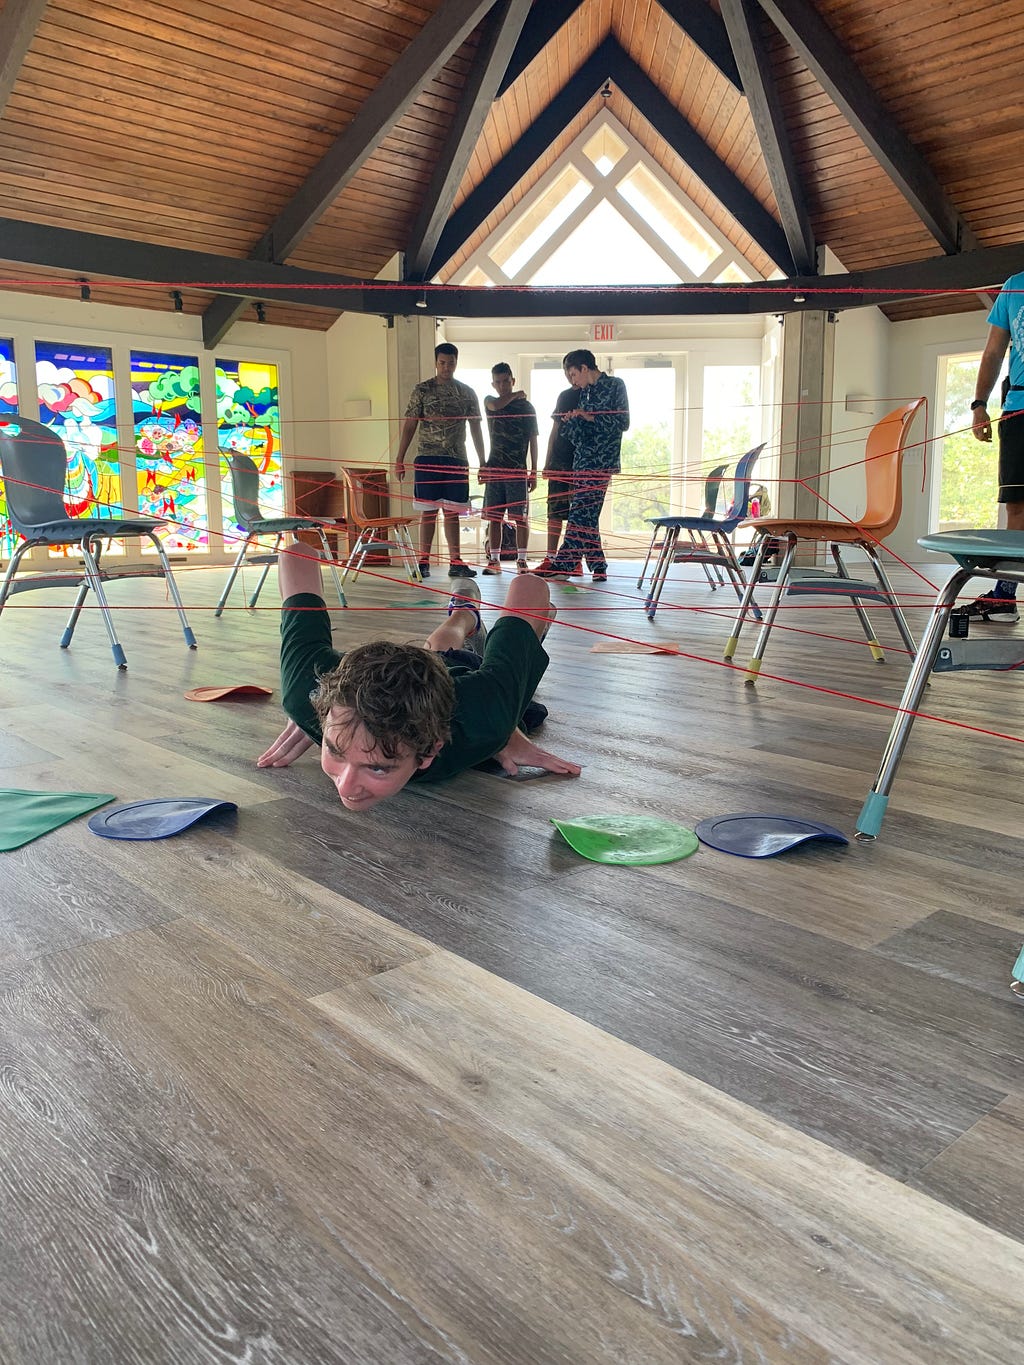 camper slides across the floor trying to avoid touching a yarn web above them. The yarn web is held up by various chairs in the sanctuary. Three other campers are in the background waiting for their turn